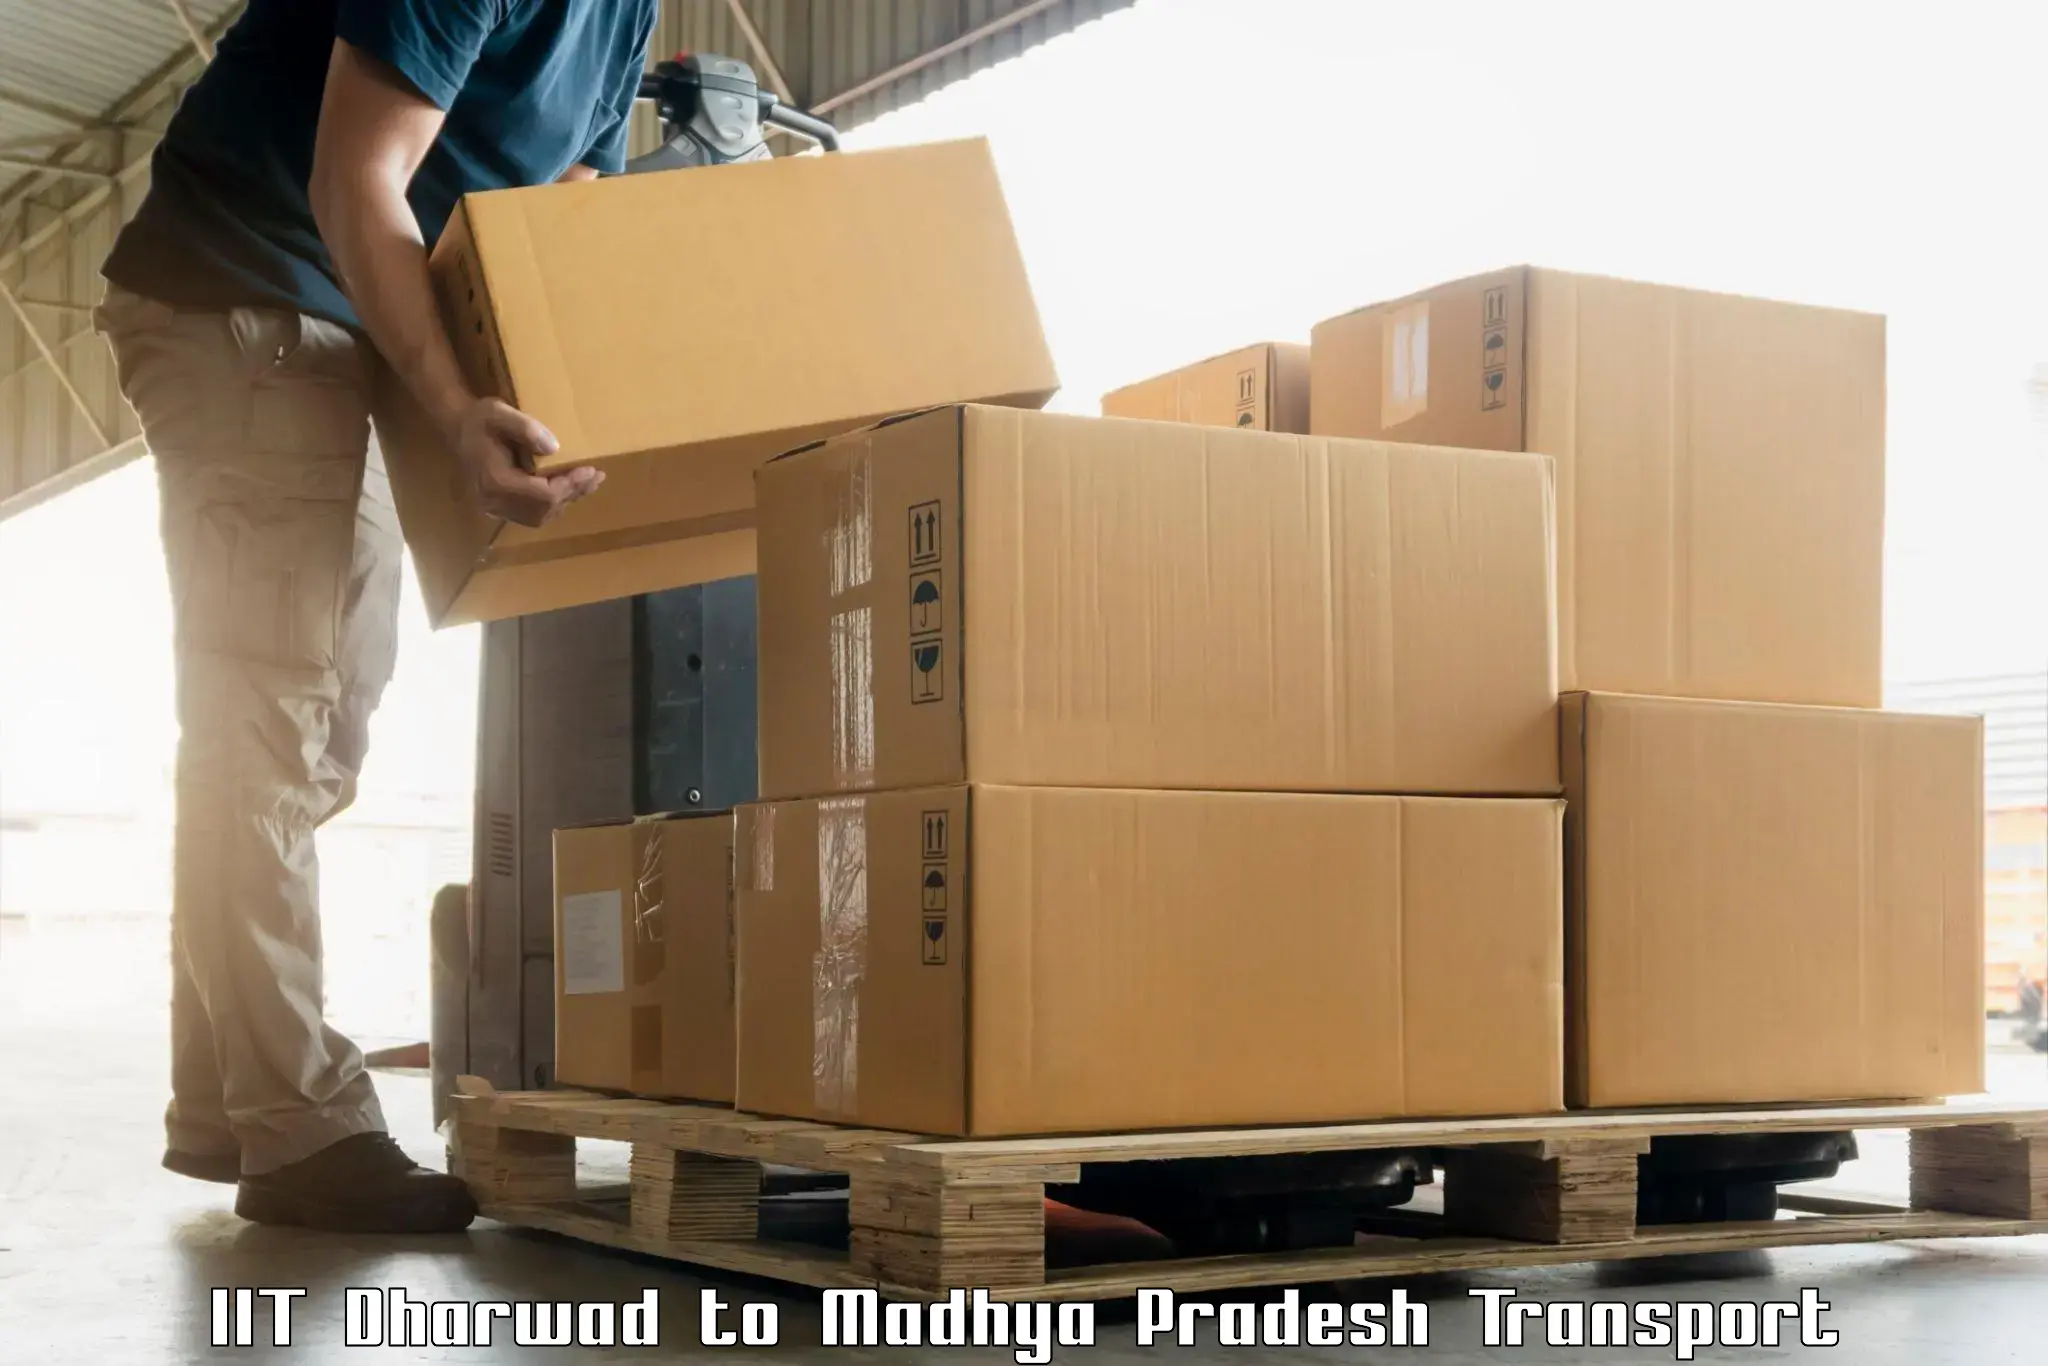 Container transport service IIT Dharwad to Sendhwa